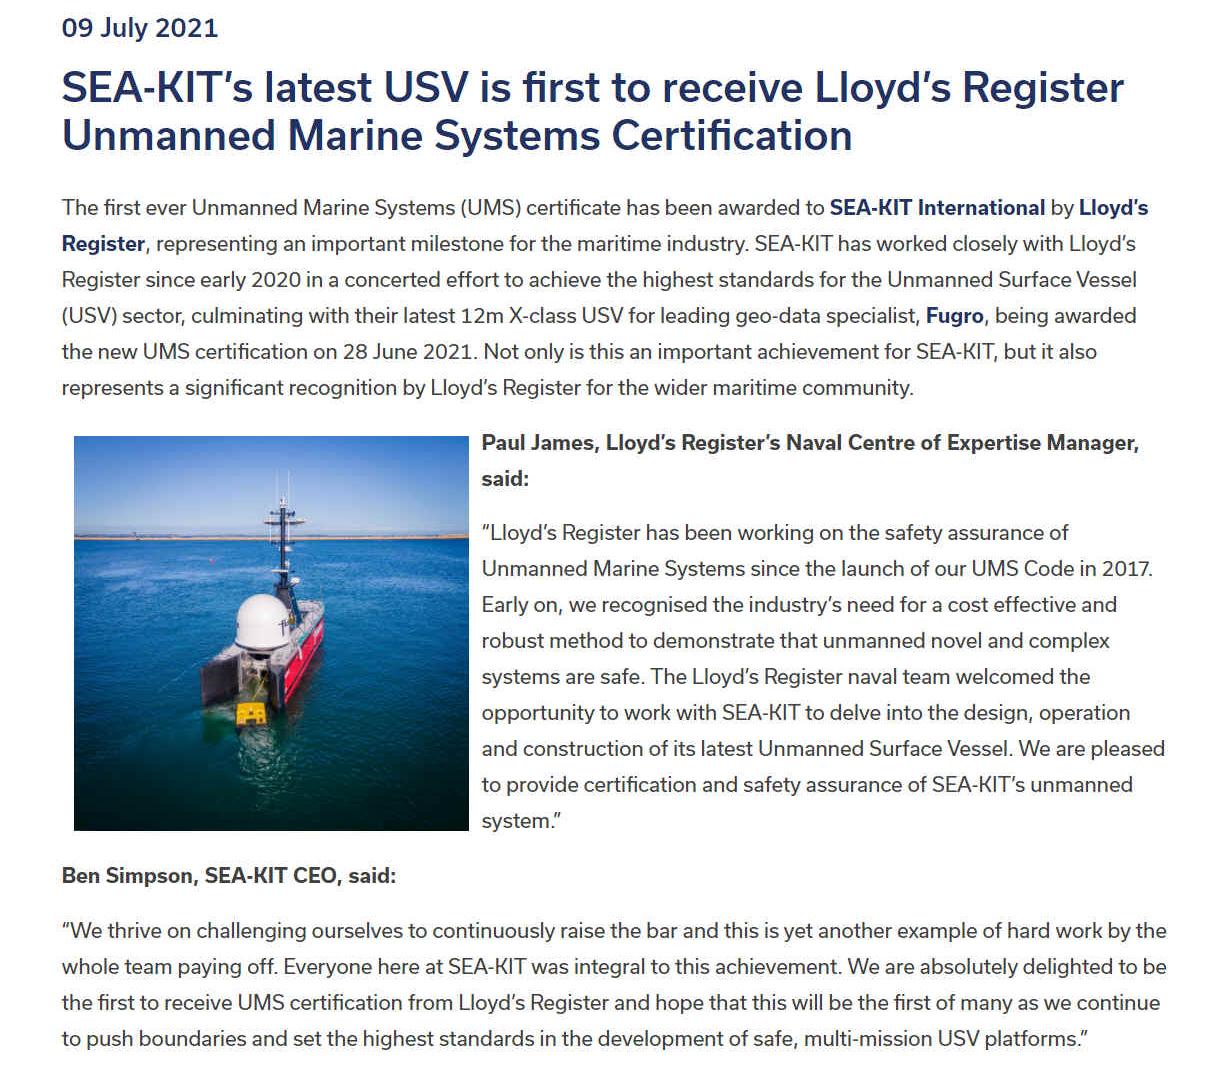 SMI, Society of Maritime Industries: Lloyd's Certificate for unmanned marine systems